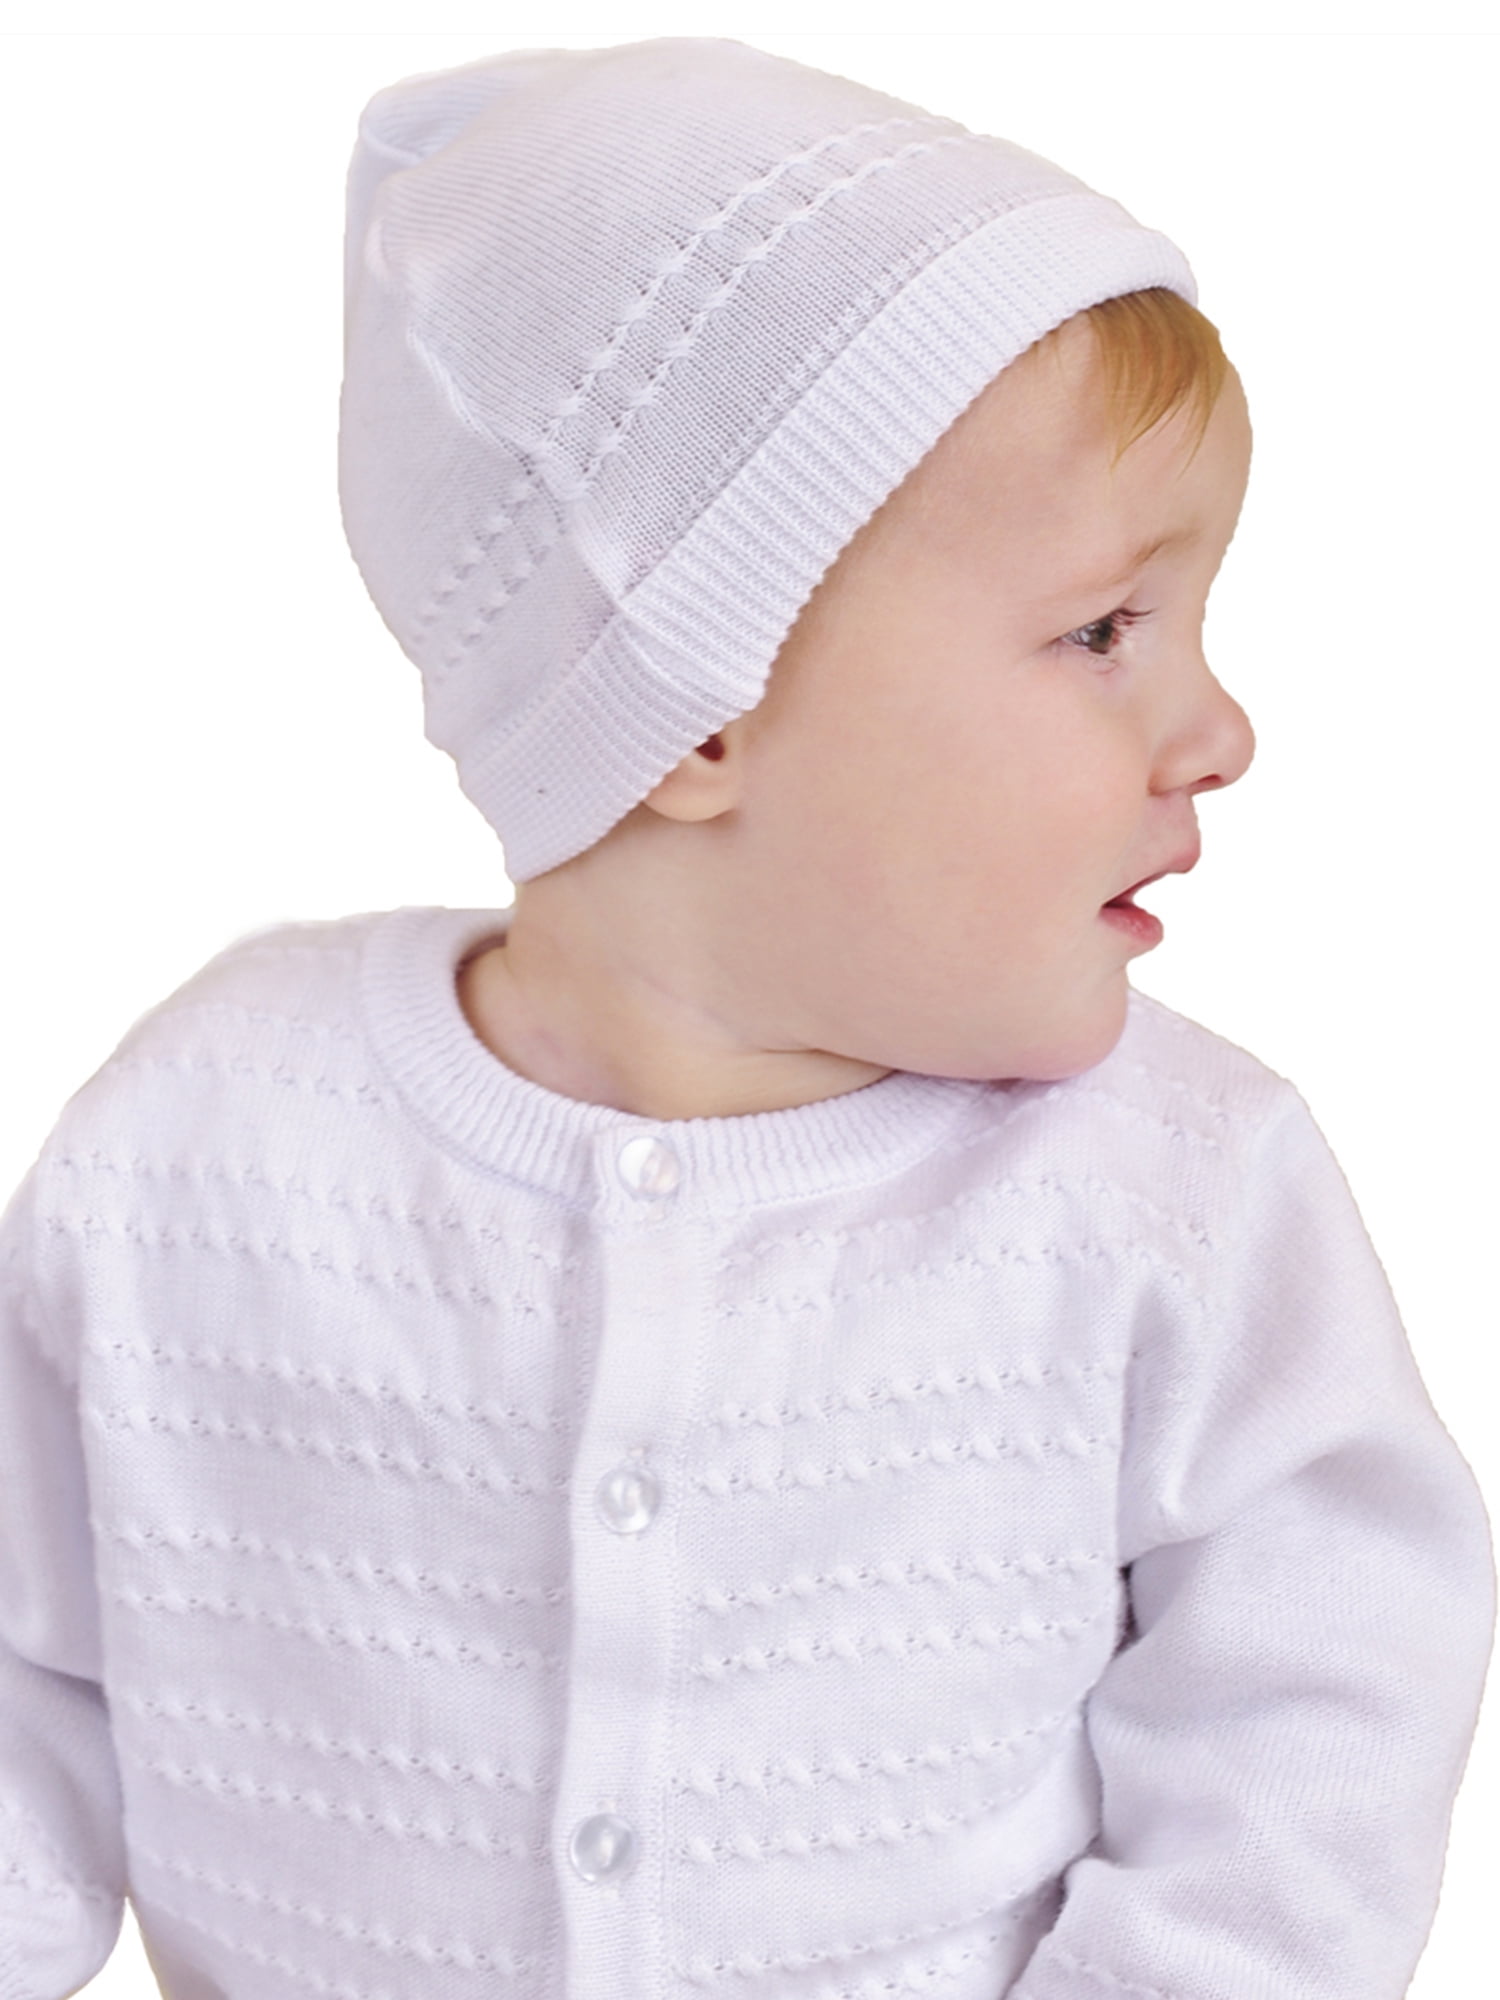 Aiden Knit Christening Baptism Blessing Outfit for Boys